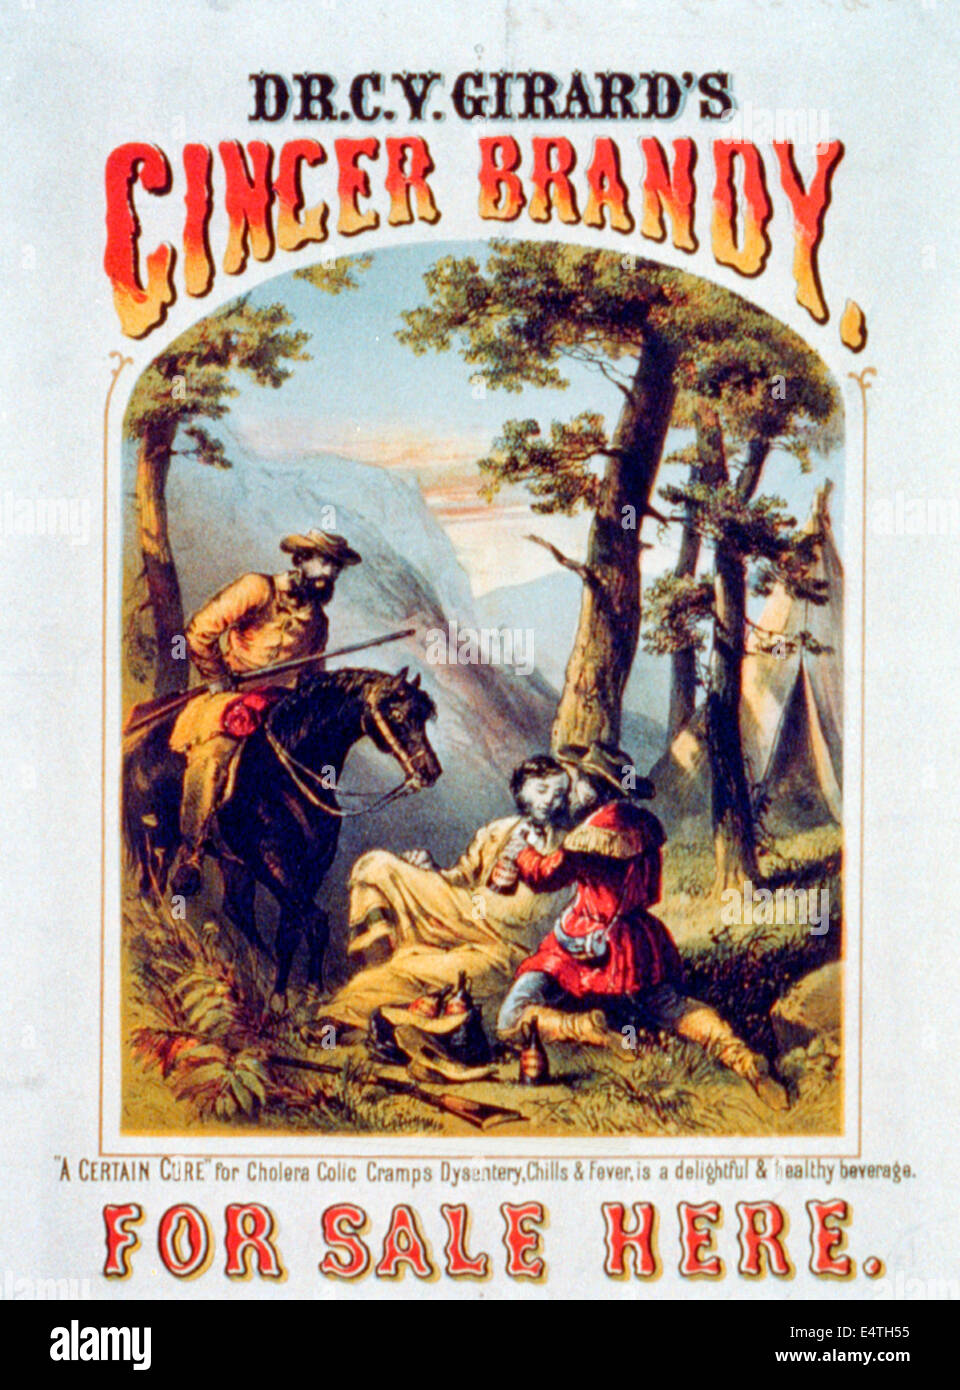 Dr. C.Y. Girard's ginger brandy, for sale here - two frontiersmen giving some of ginger brandy to a sick man leaning against a tree. Advertisement circa 1860 Stock Photo